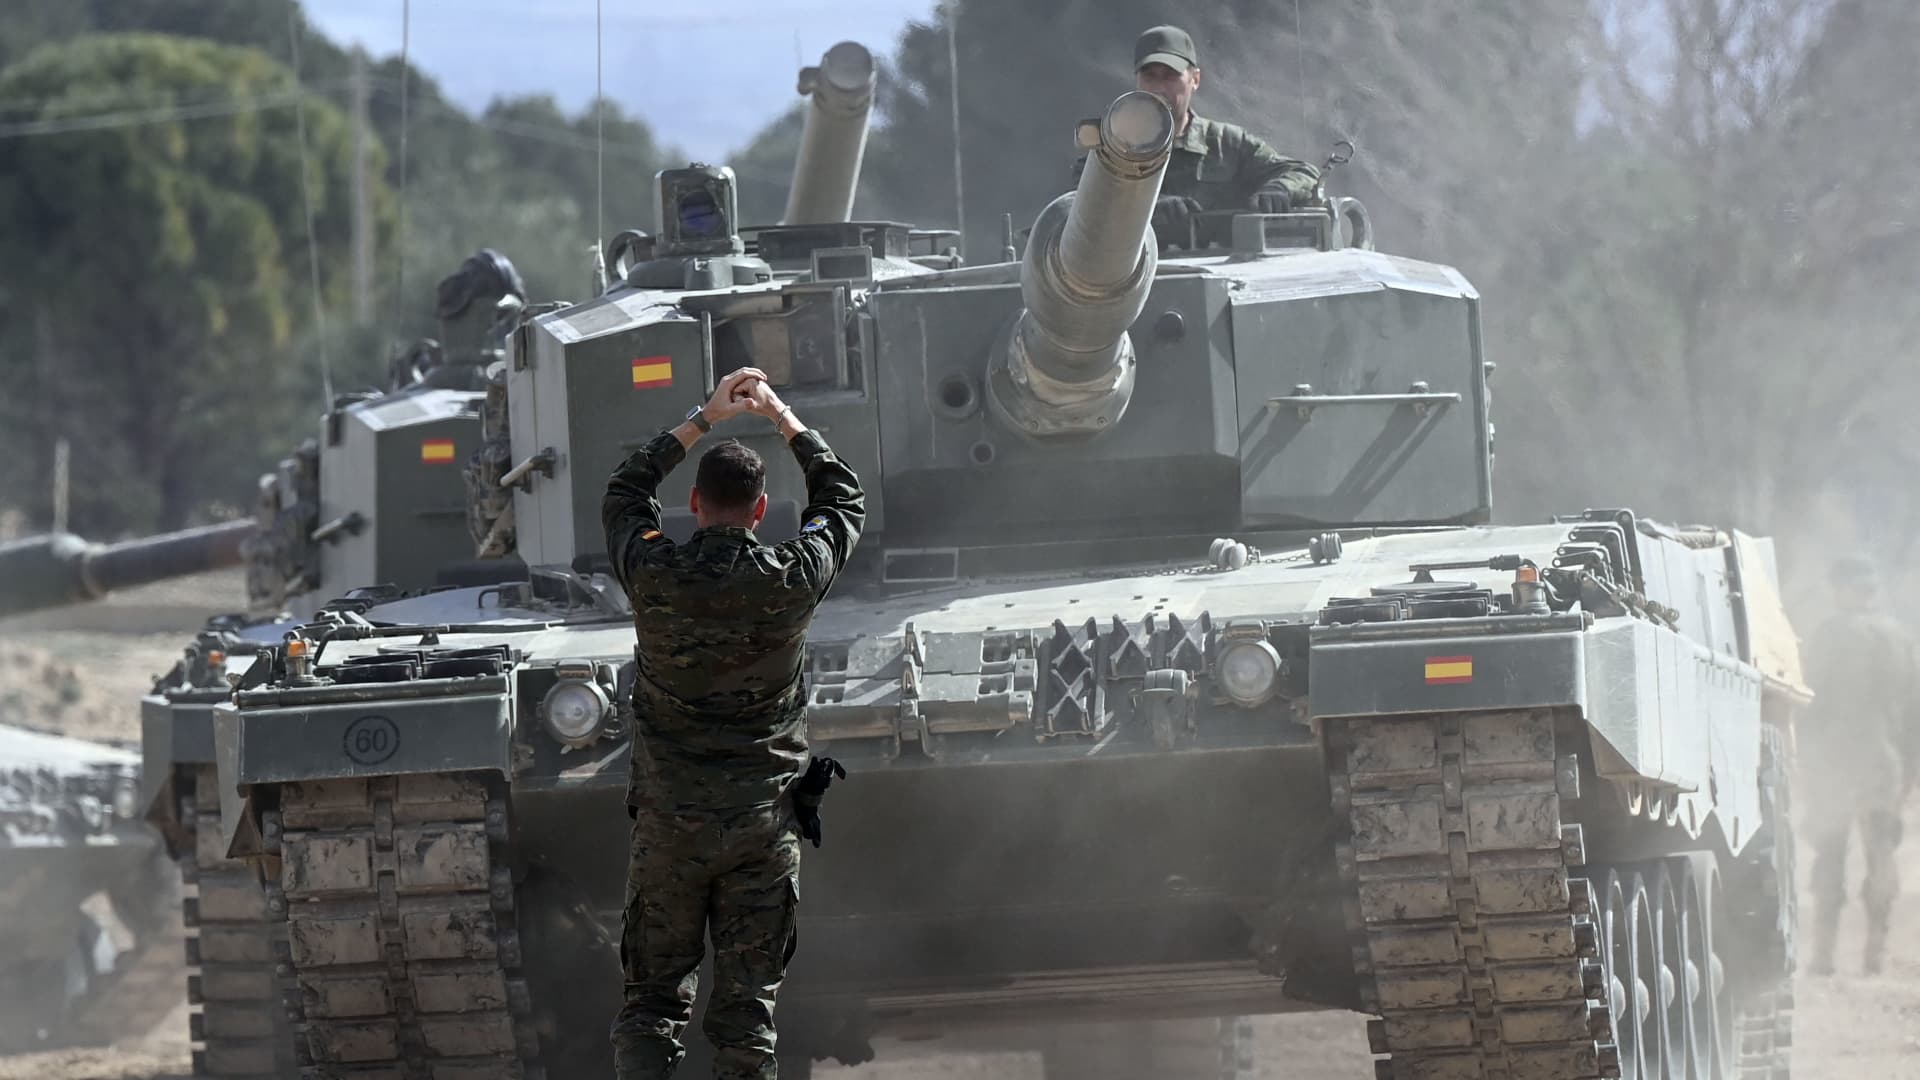 Ukrainian military personnel receive armoured manoeuvre training on German-made Leopard 2 battle tanks at the Spanish army's training centre of San Gregorio in Zaragoza on March 13, 2023.